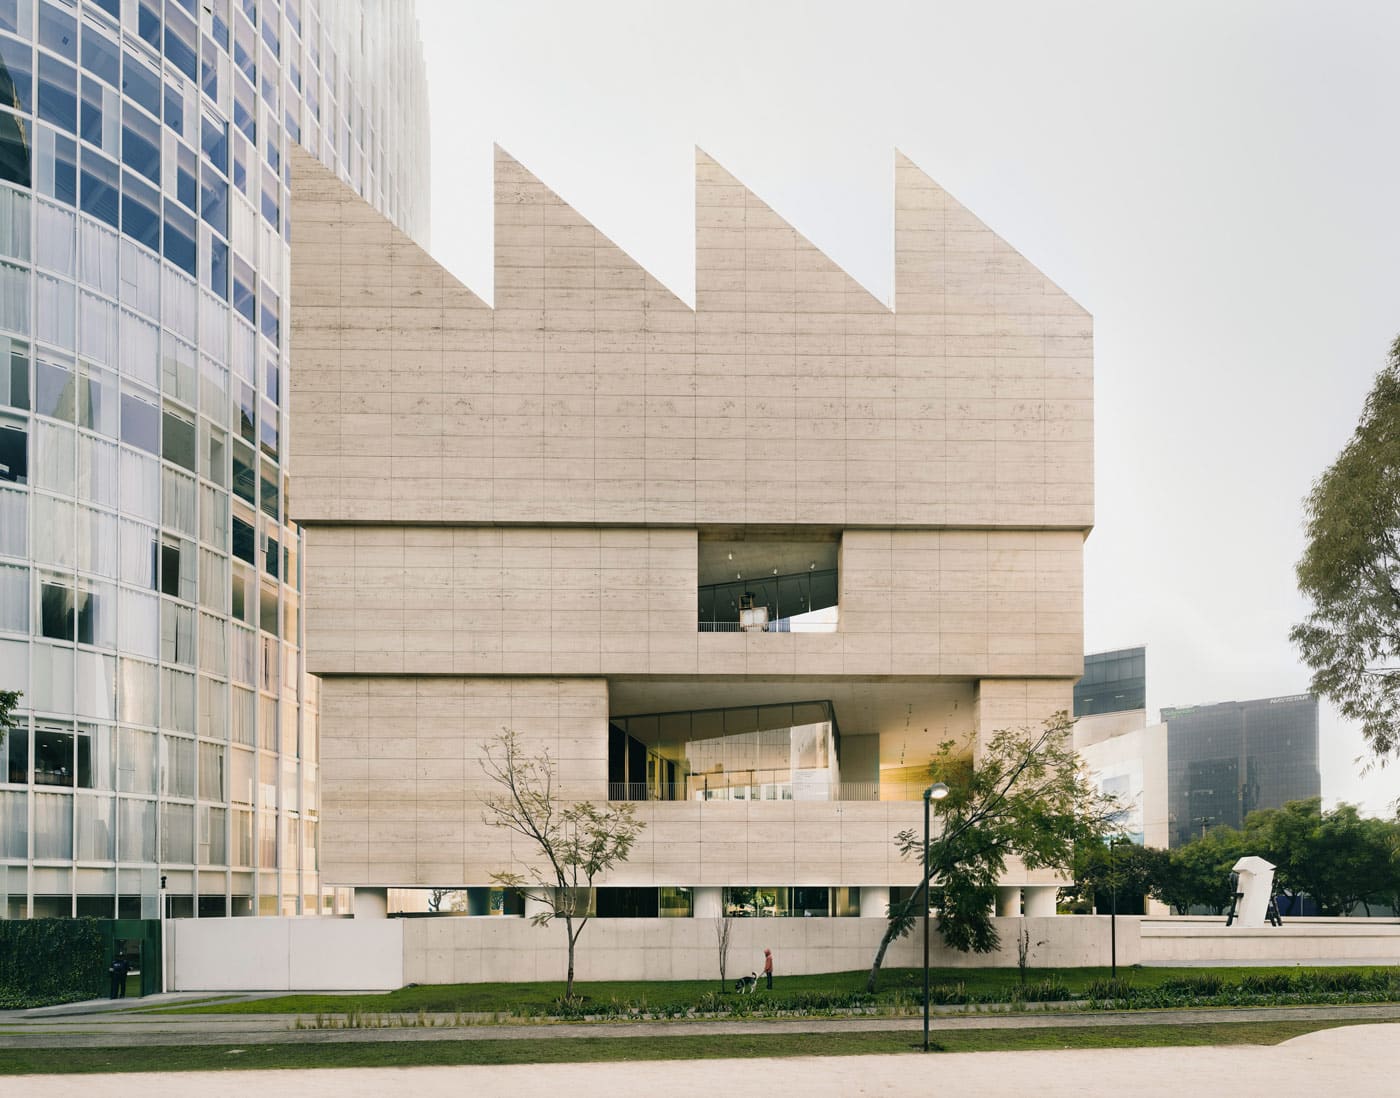 Mexico City's best museums and galleries | The David Chipperfield-designed exterior of Museo Jumex